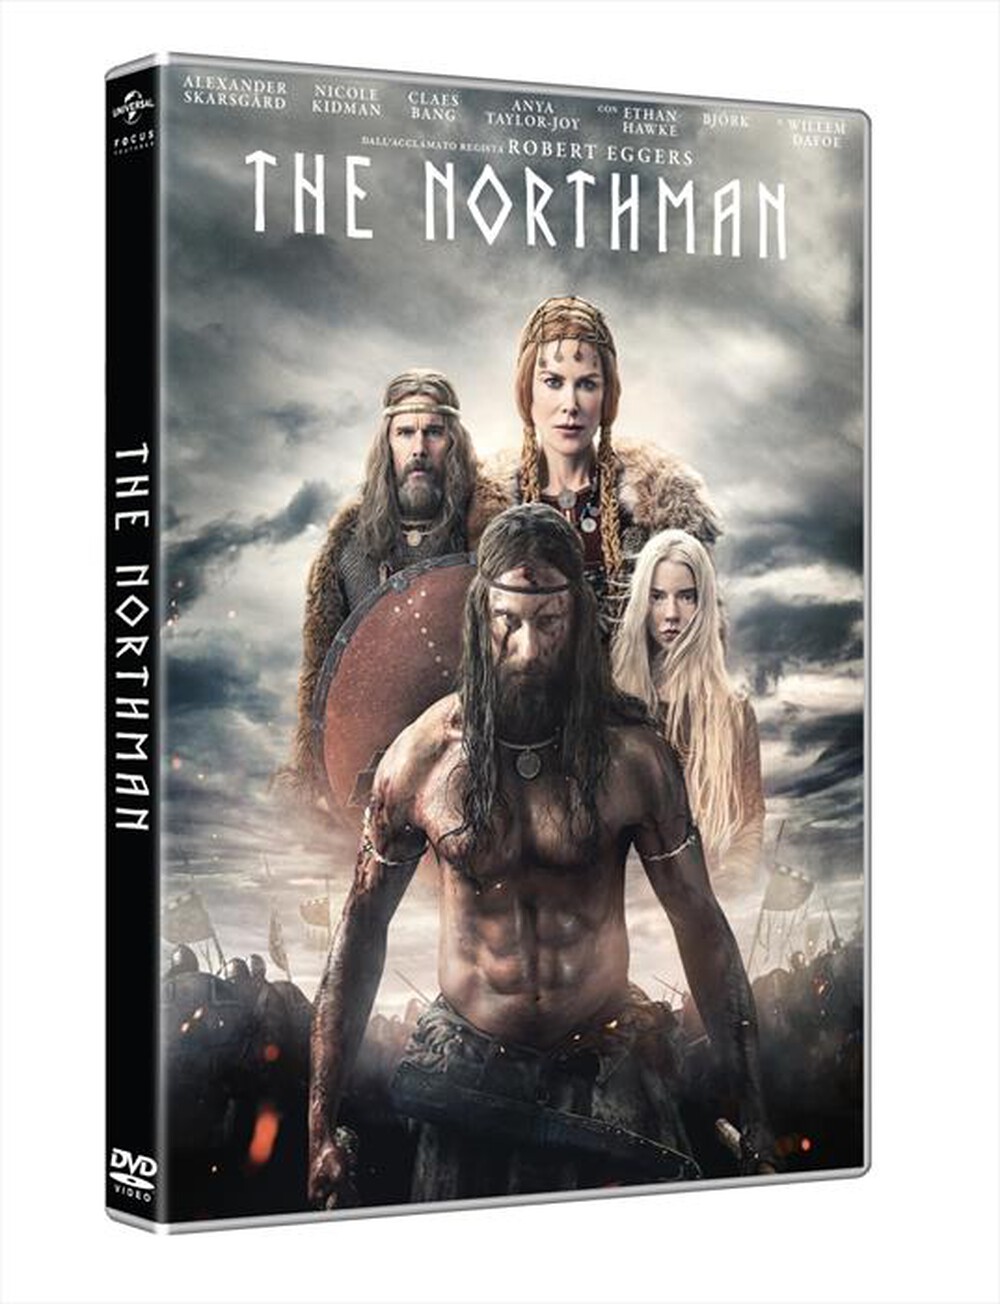 "UNIVERSAL PICTURES - Northman (The)"